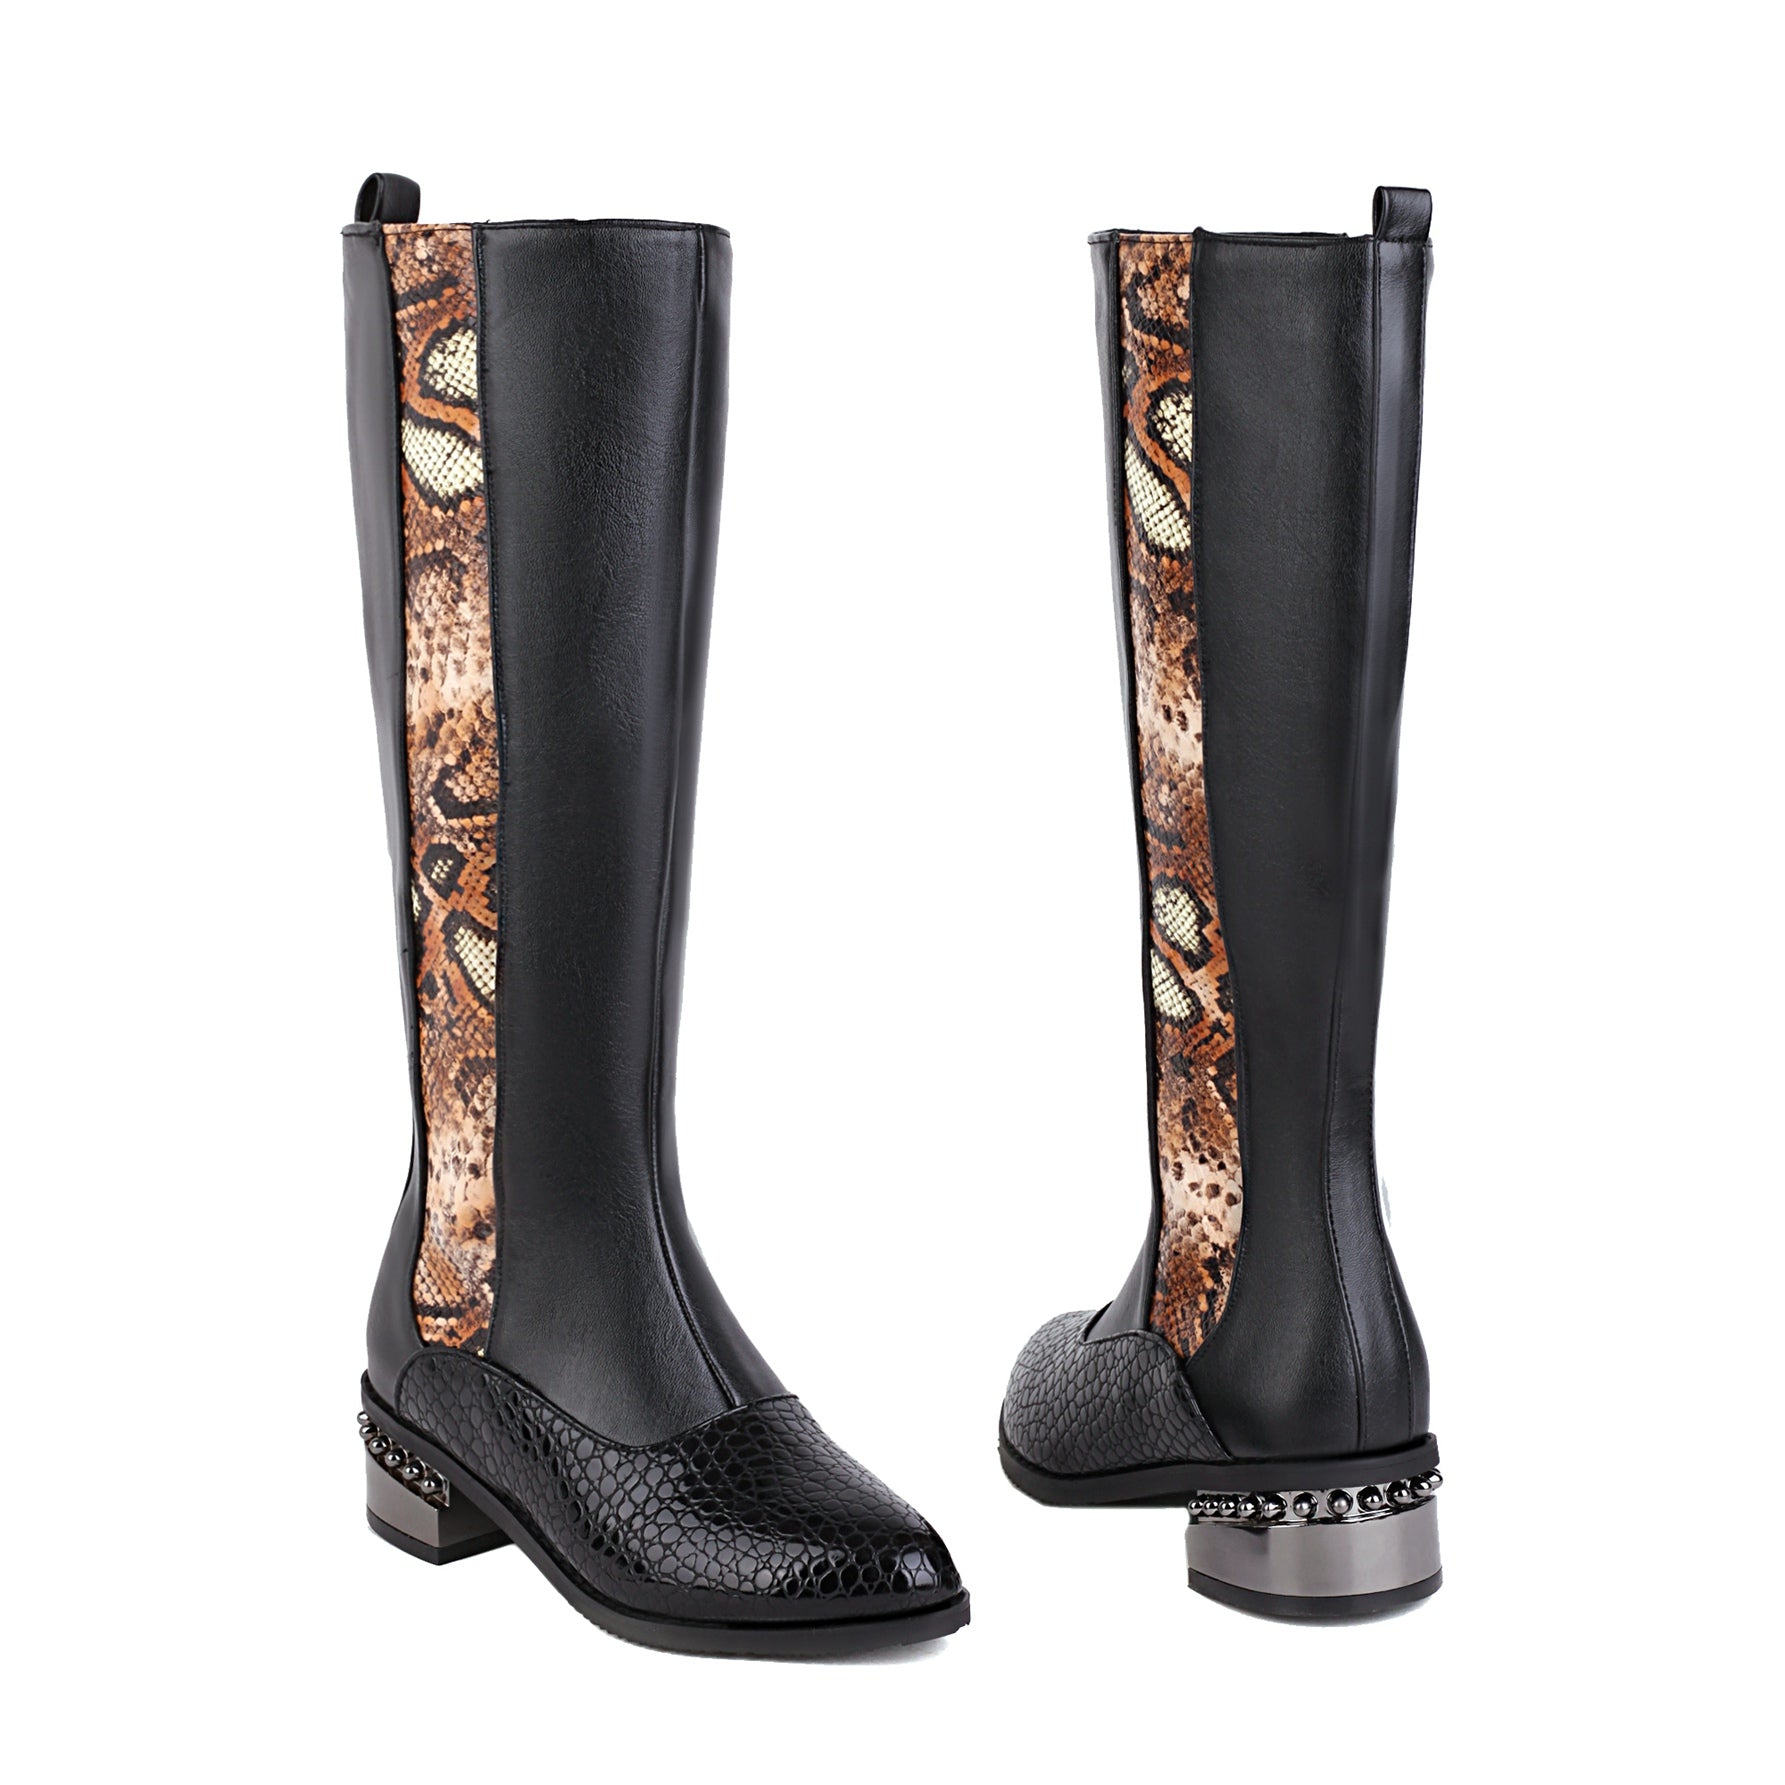 Bigsizeheels Concise snake print round toe over-the-knee boots-Black freeshipping - bigsizeheel®-size5-size15 -All Plus Sizes Available!